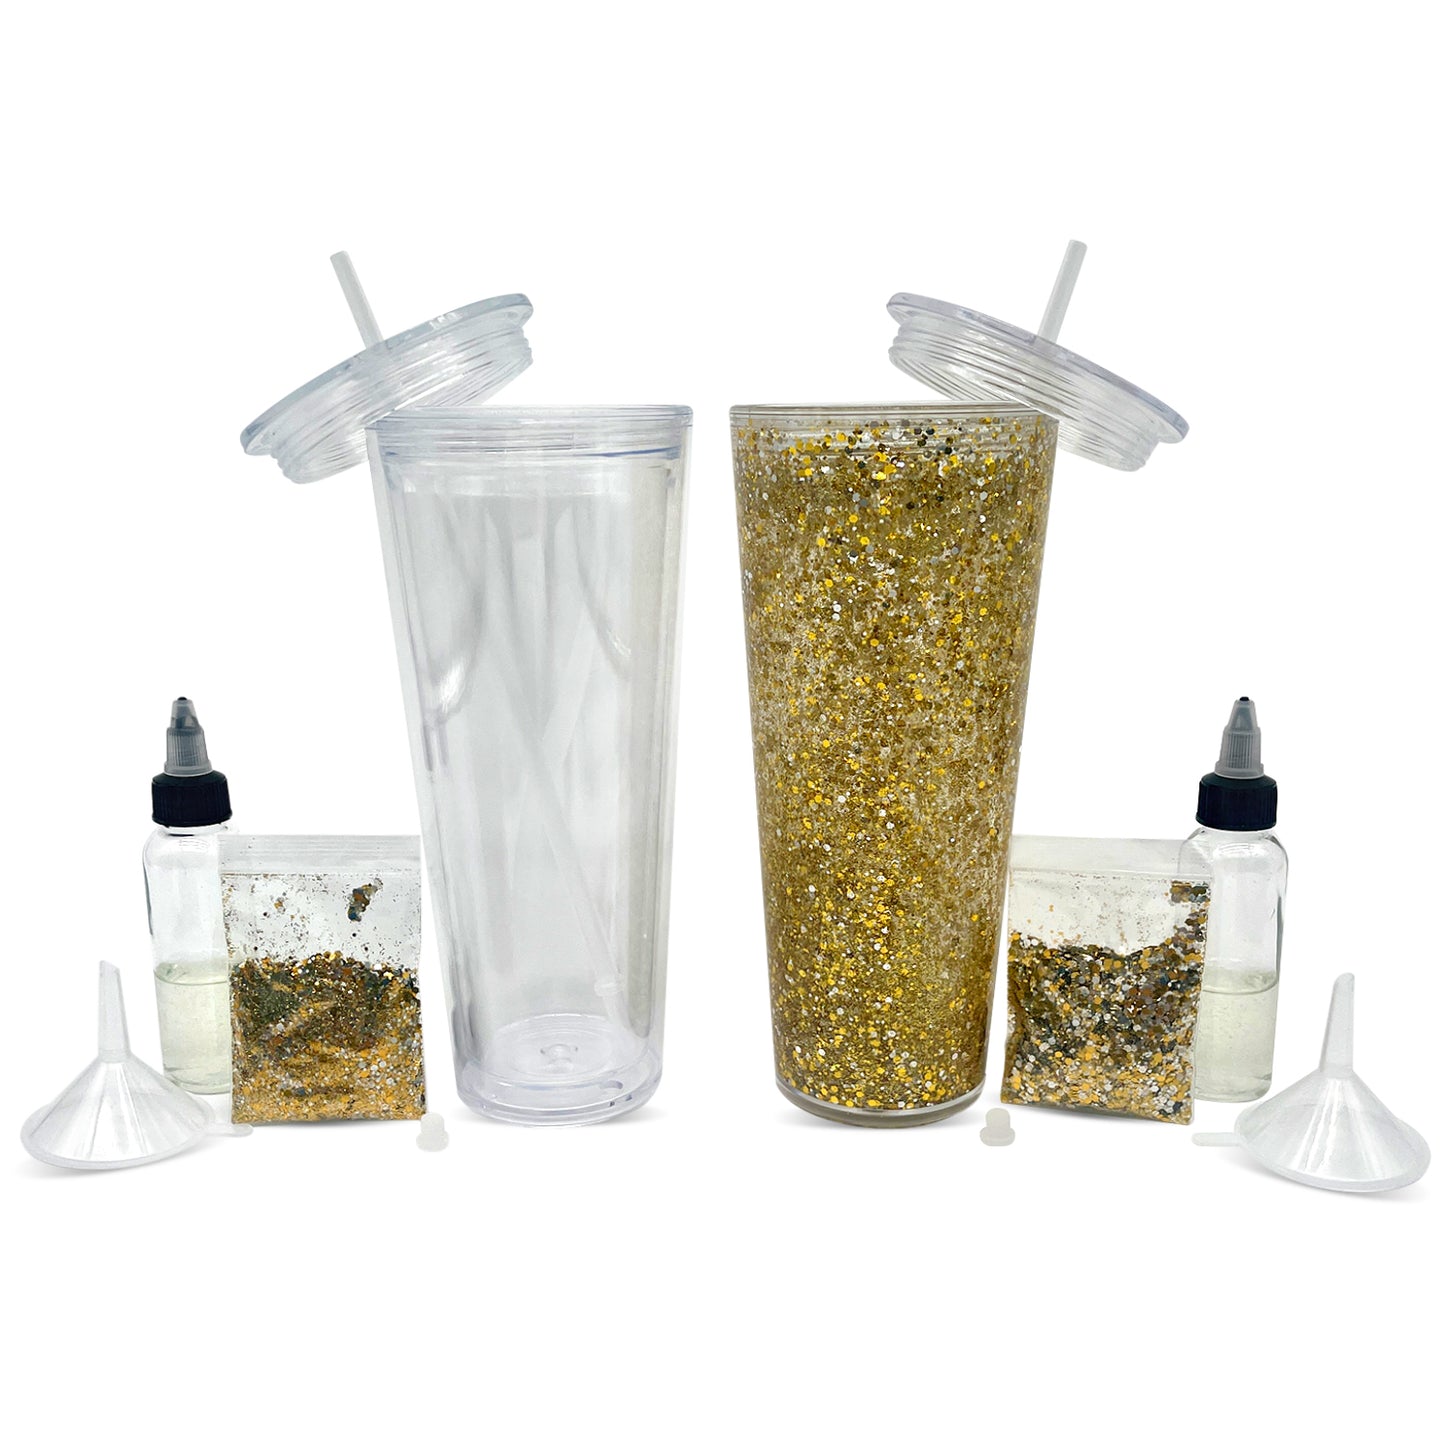 Snow Globe Tumbler Kit (2 pack): DYI complete craft kit includes 24oz Double Wall Tumbler w/predrilled hole, Stopper, Lid, Straw, Funnel, Glitter, 2oz Container w/ 1oz of Snowglobe liquid